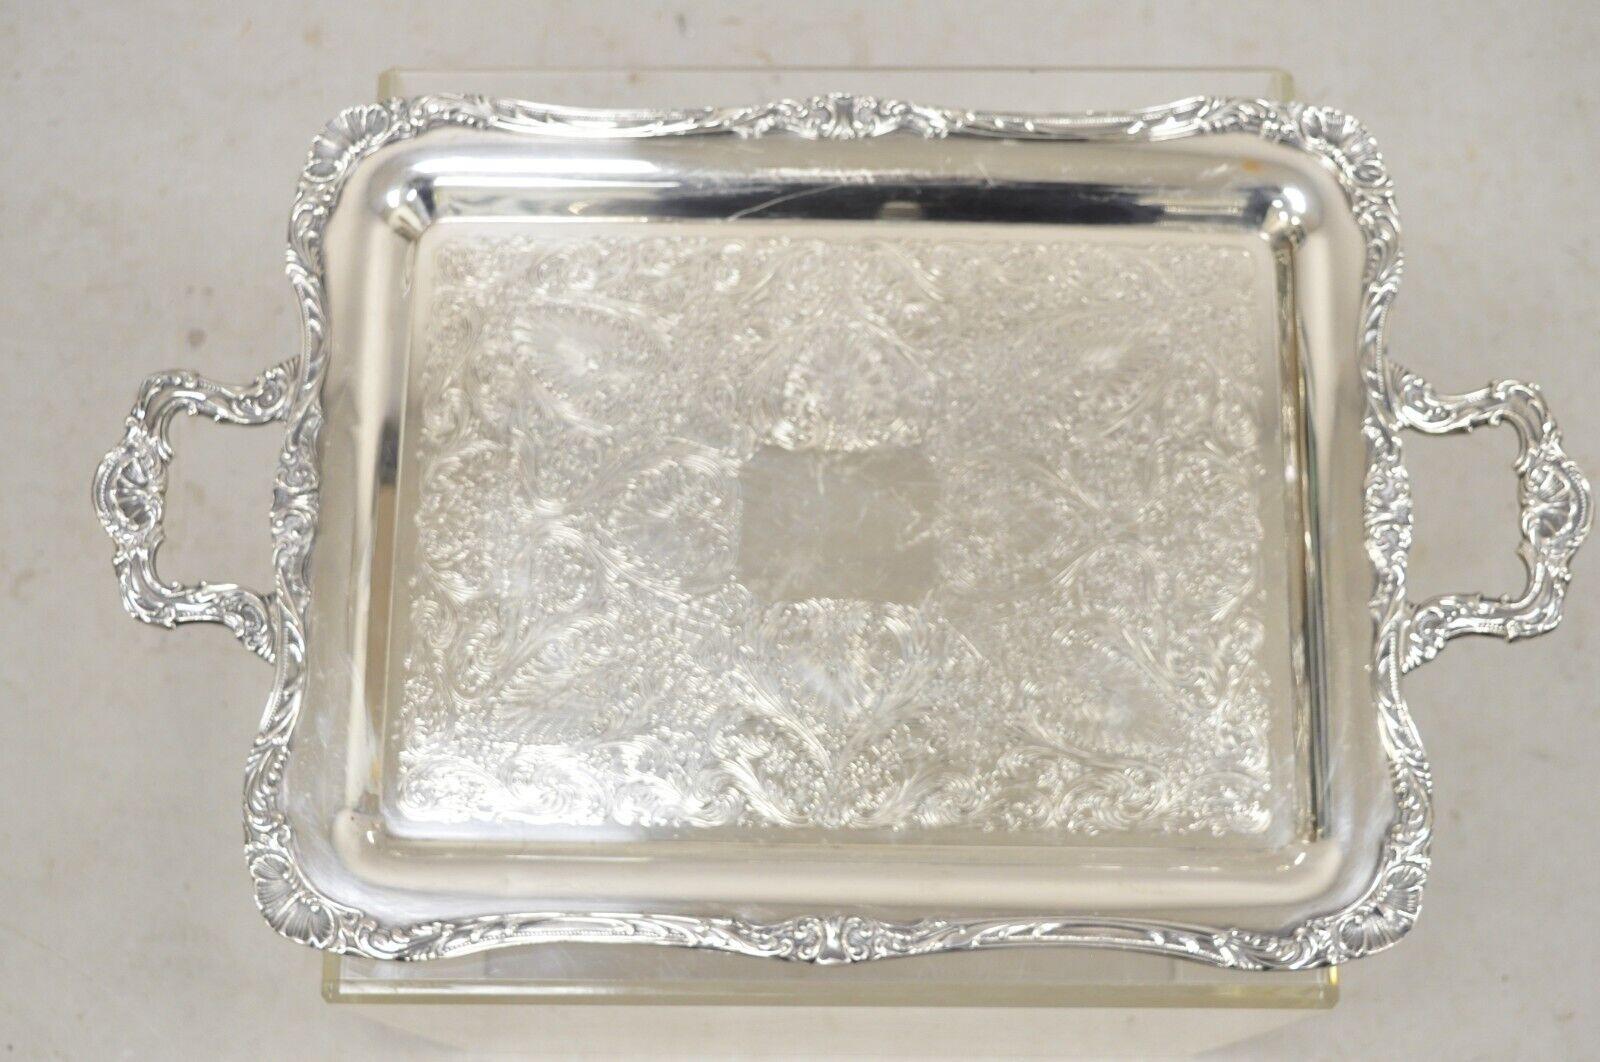 Vintage WM Rogers 290 Silver Plated Ornate Victorian Style Serving Platter Tray. Circa  Mid to Late 20th Century.
Measurements: 1.5